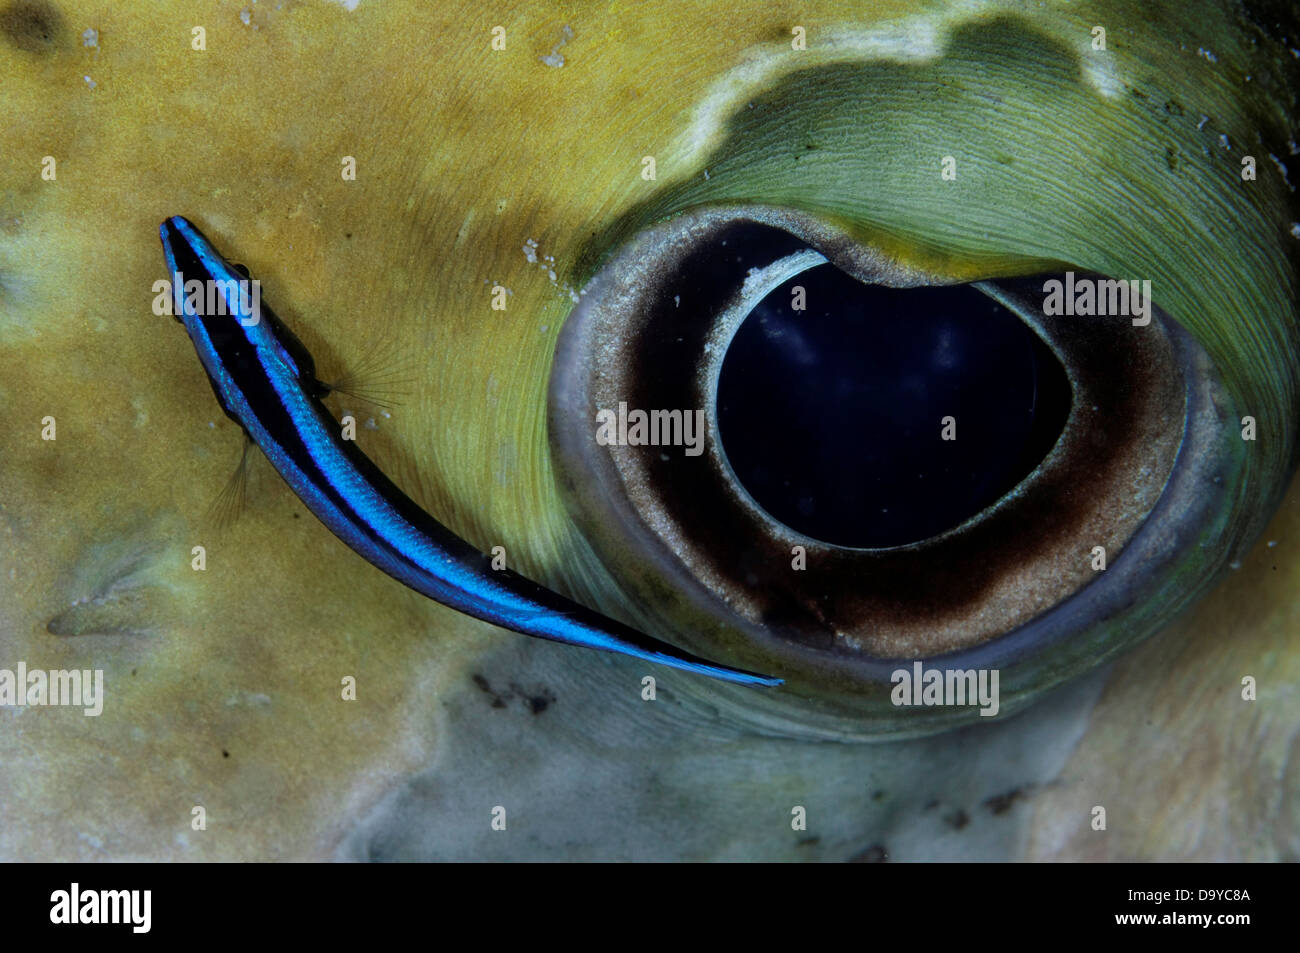 Detail of eye and cleaner wrasse of Black-Blotched Porcupinefish (Diodon liturosus), South Male Atoll, Maldives Stock Photo